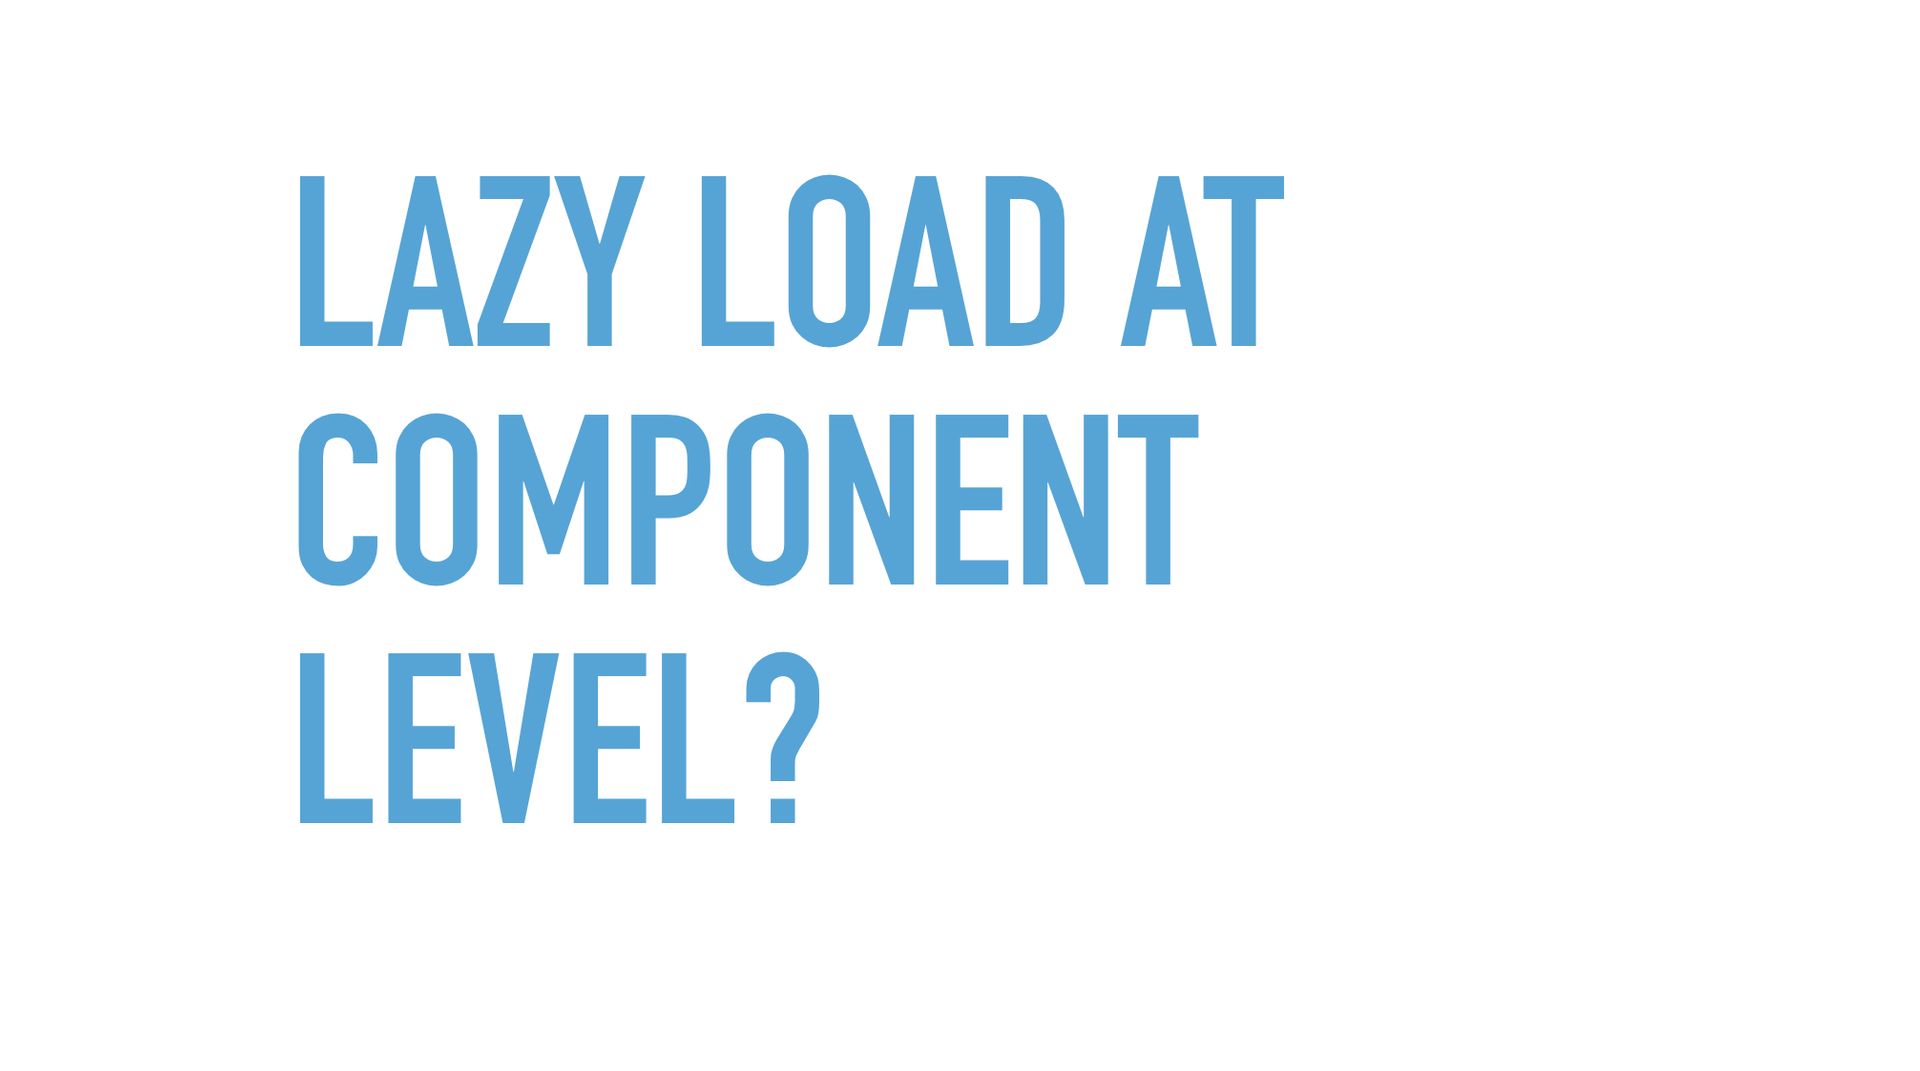 Slide text: Lazy load at component level?